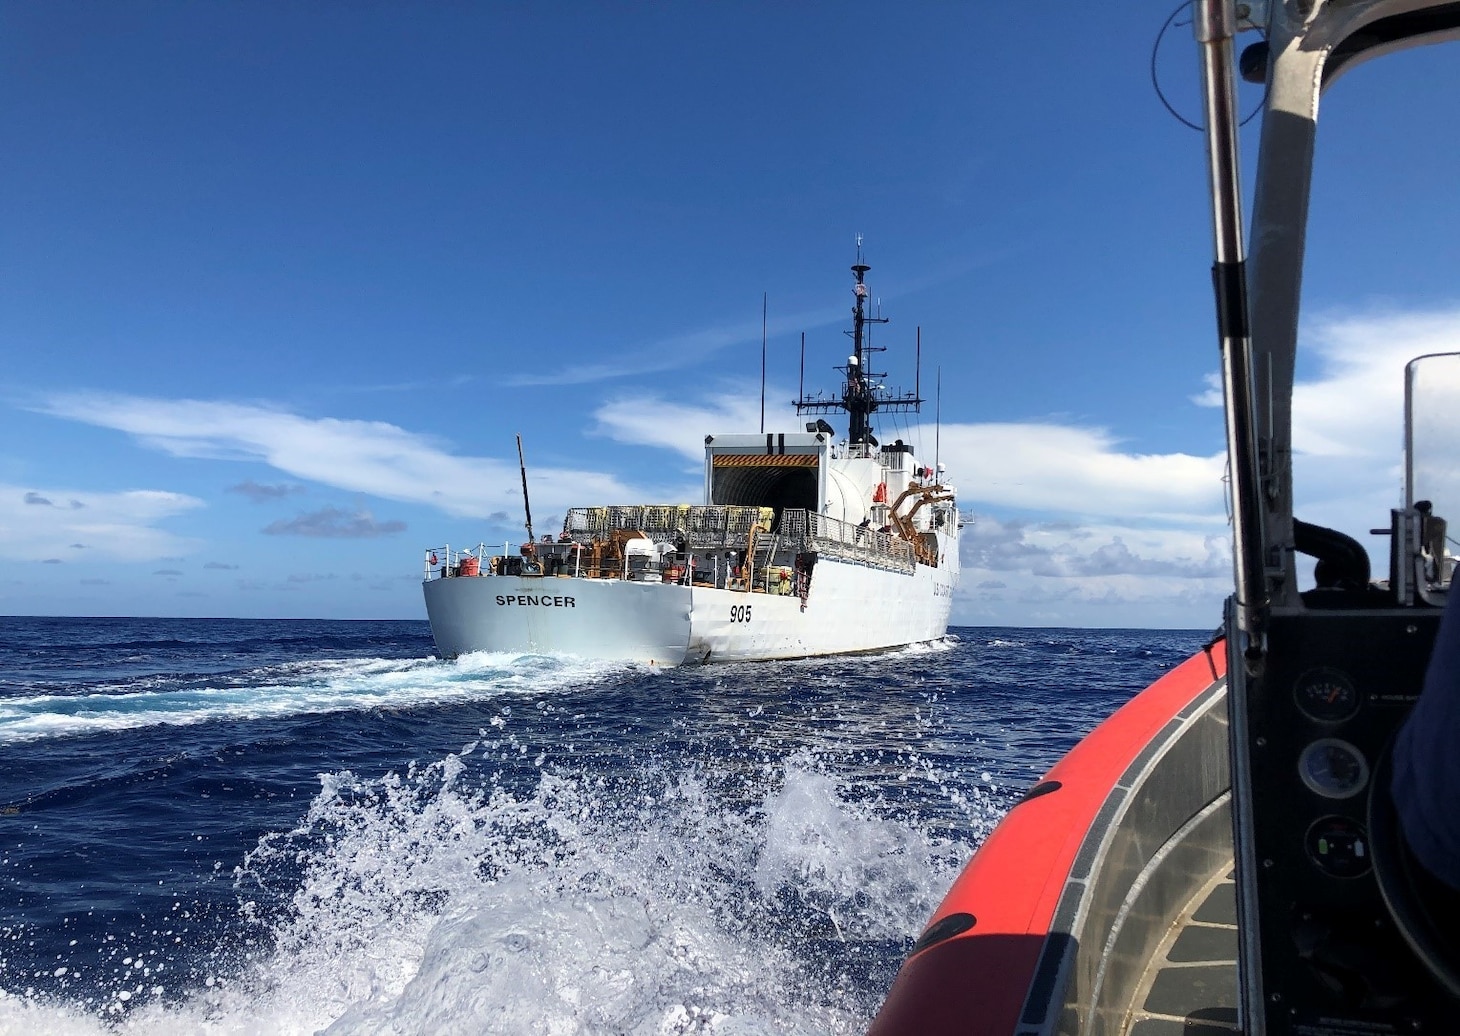 U.S. Coast Guard Cutter Spencer (WMEC 905) underway on patrol in the Eastern Pacific, January 2021. The crew covered over 11,000 miles seizing over $10 million of drugs and assisted in disrupting transnational crime organizations. (U.S. Coast Guard courtesy photo/Released)